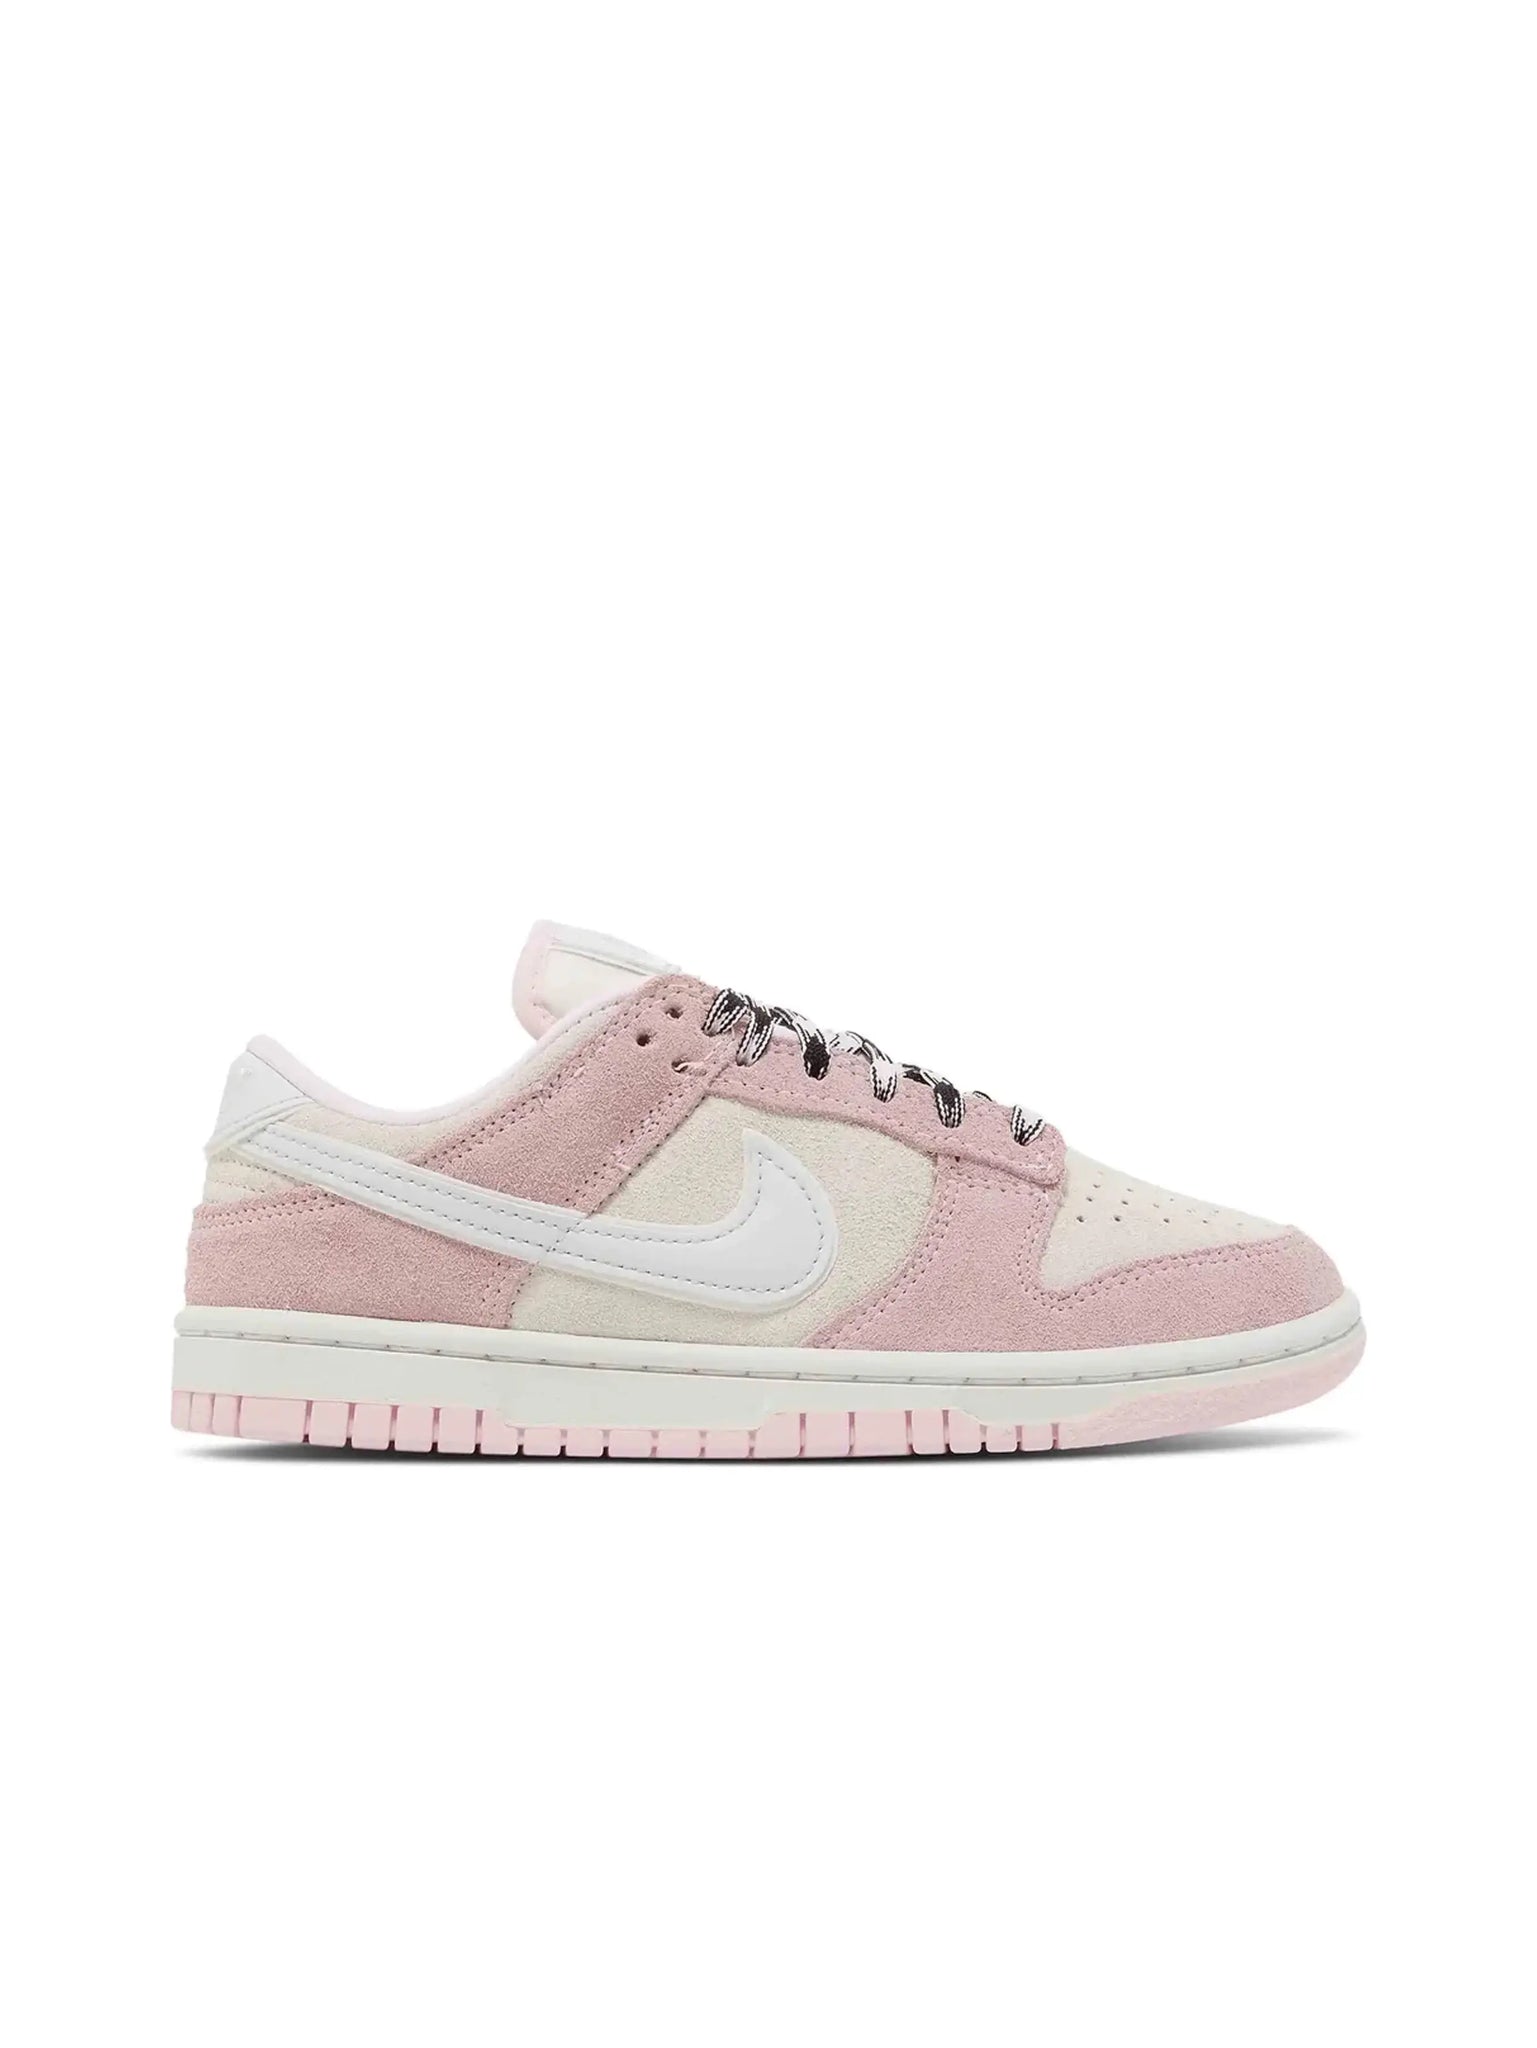 Nike Dunk Low LX Pink Foam (W) in Auckland, New Zealand - Shop name